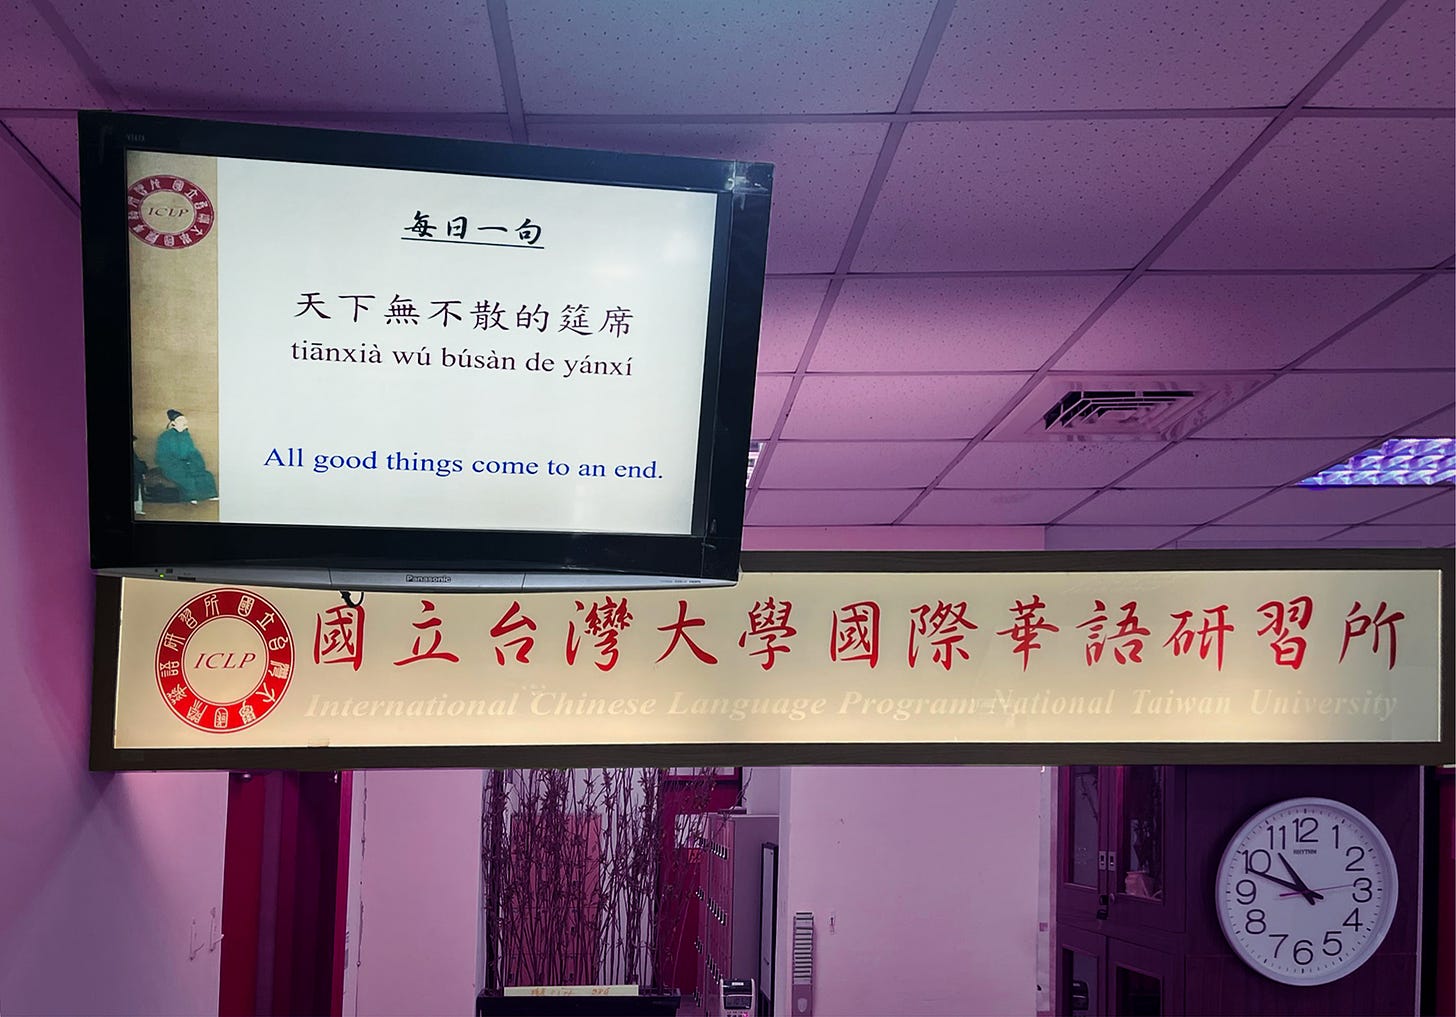 A digital screen at a school entrance displaying the Chinese phrase, "All good things come to an end"